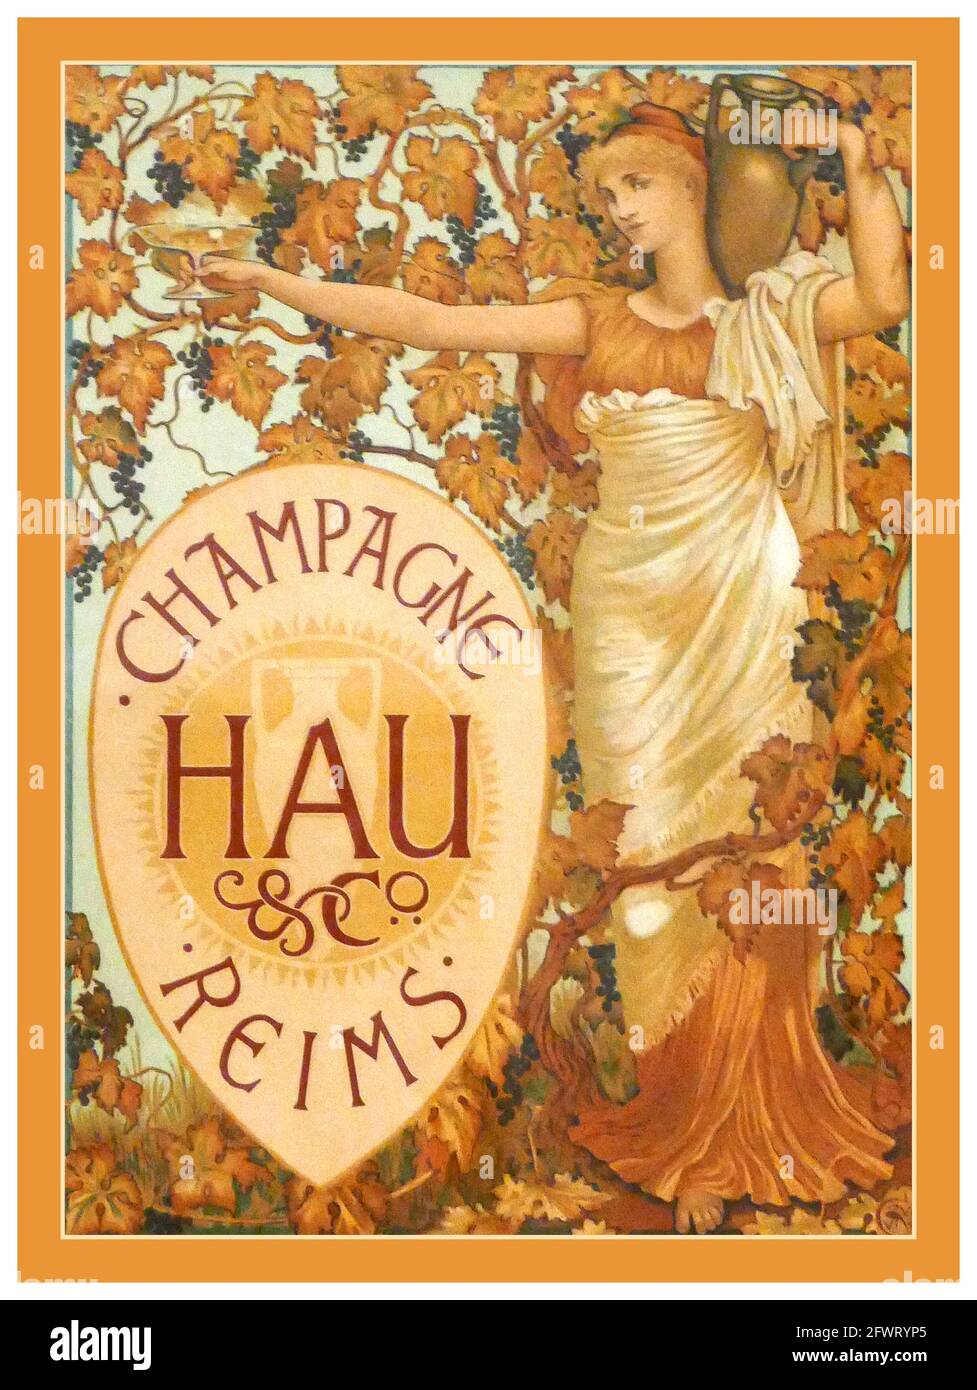 Vintage 1890’s Champagne Hau & Co. Poster Art Deco design by Walter Crane. Champagne Reims France (1894)   Lithograph poster art in colour Stock Photo